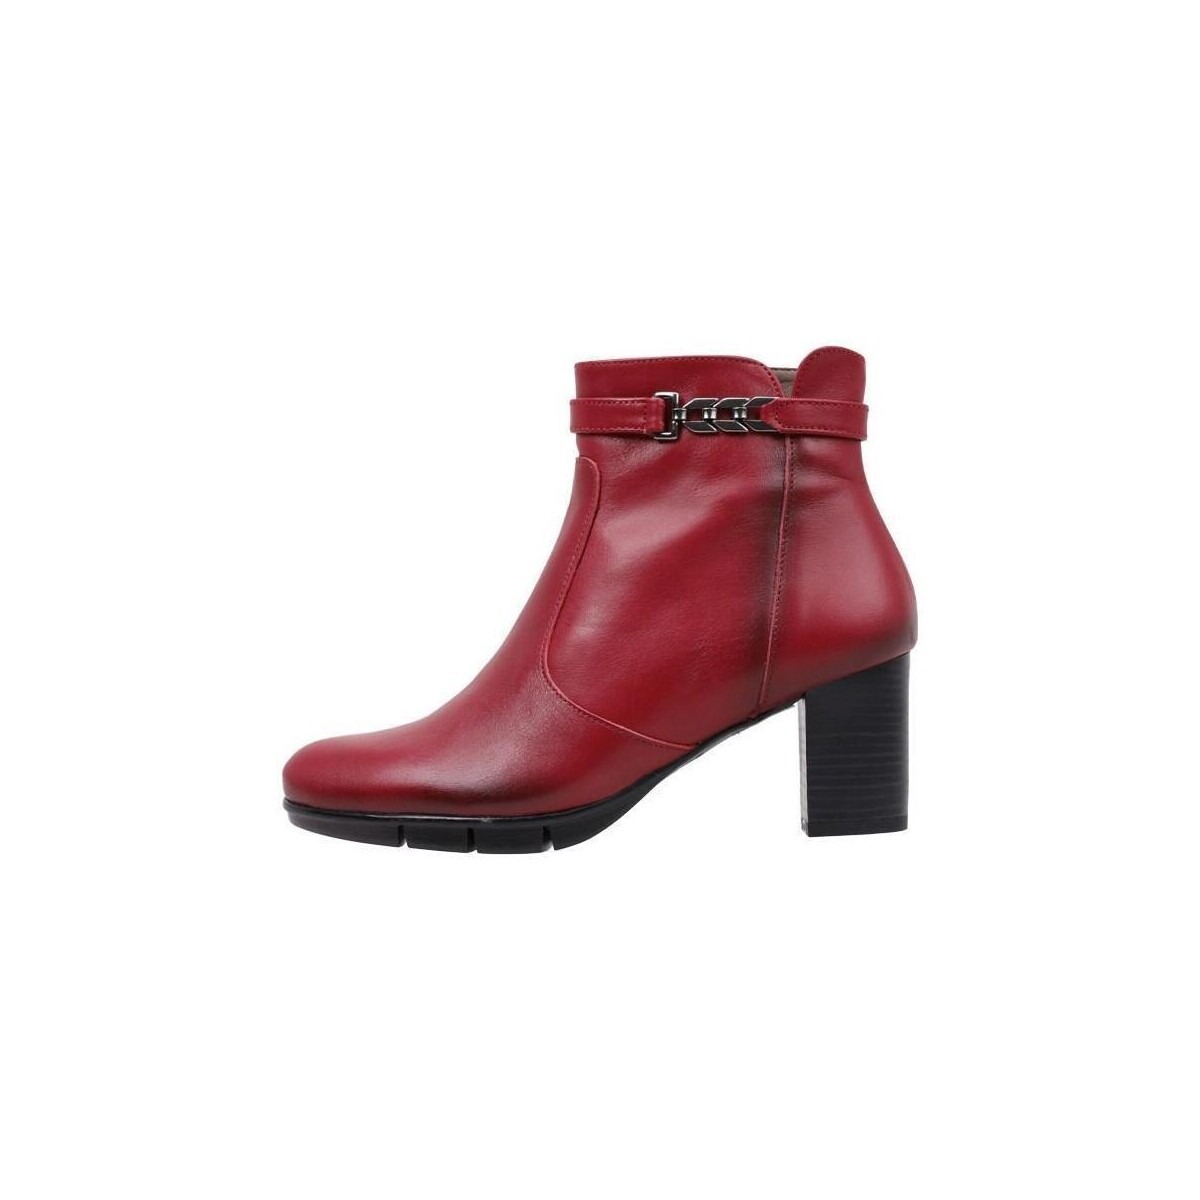 Sandra Fontan - Lady Ankle Boots in Red by Spartoo GOOFASH